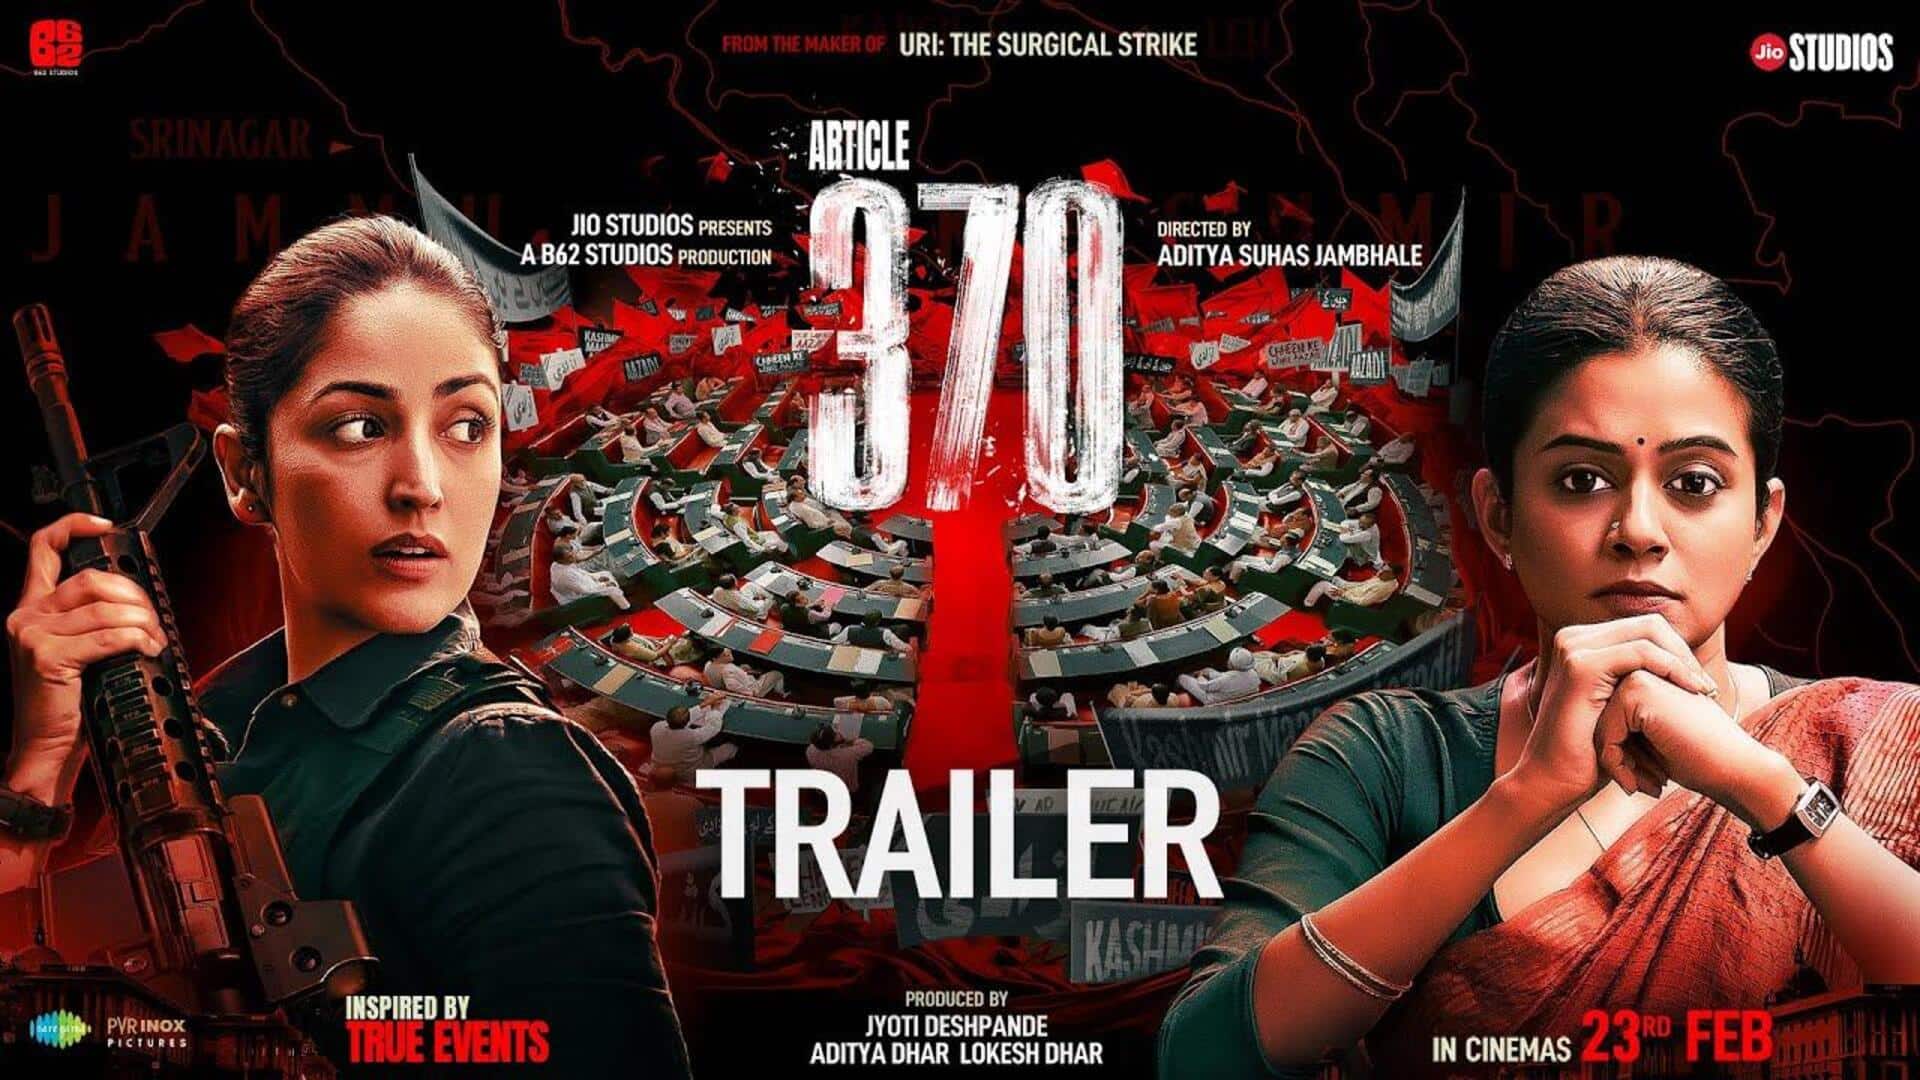 Box office collection: 'Article 370' seeks momentum for longevity